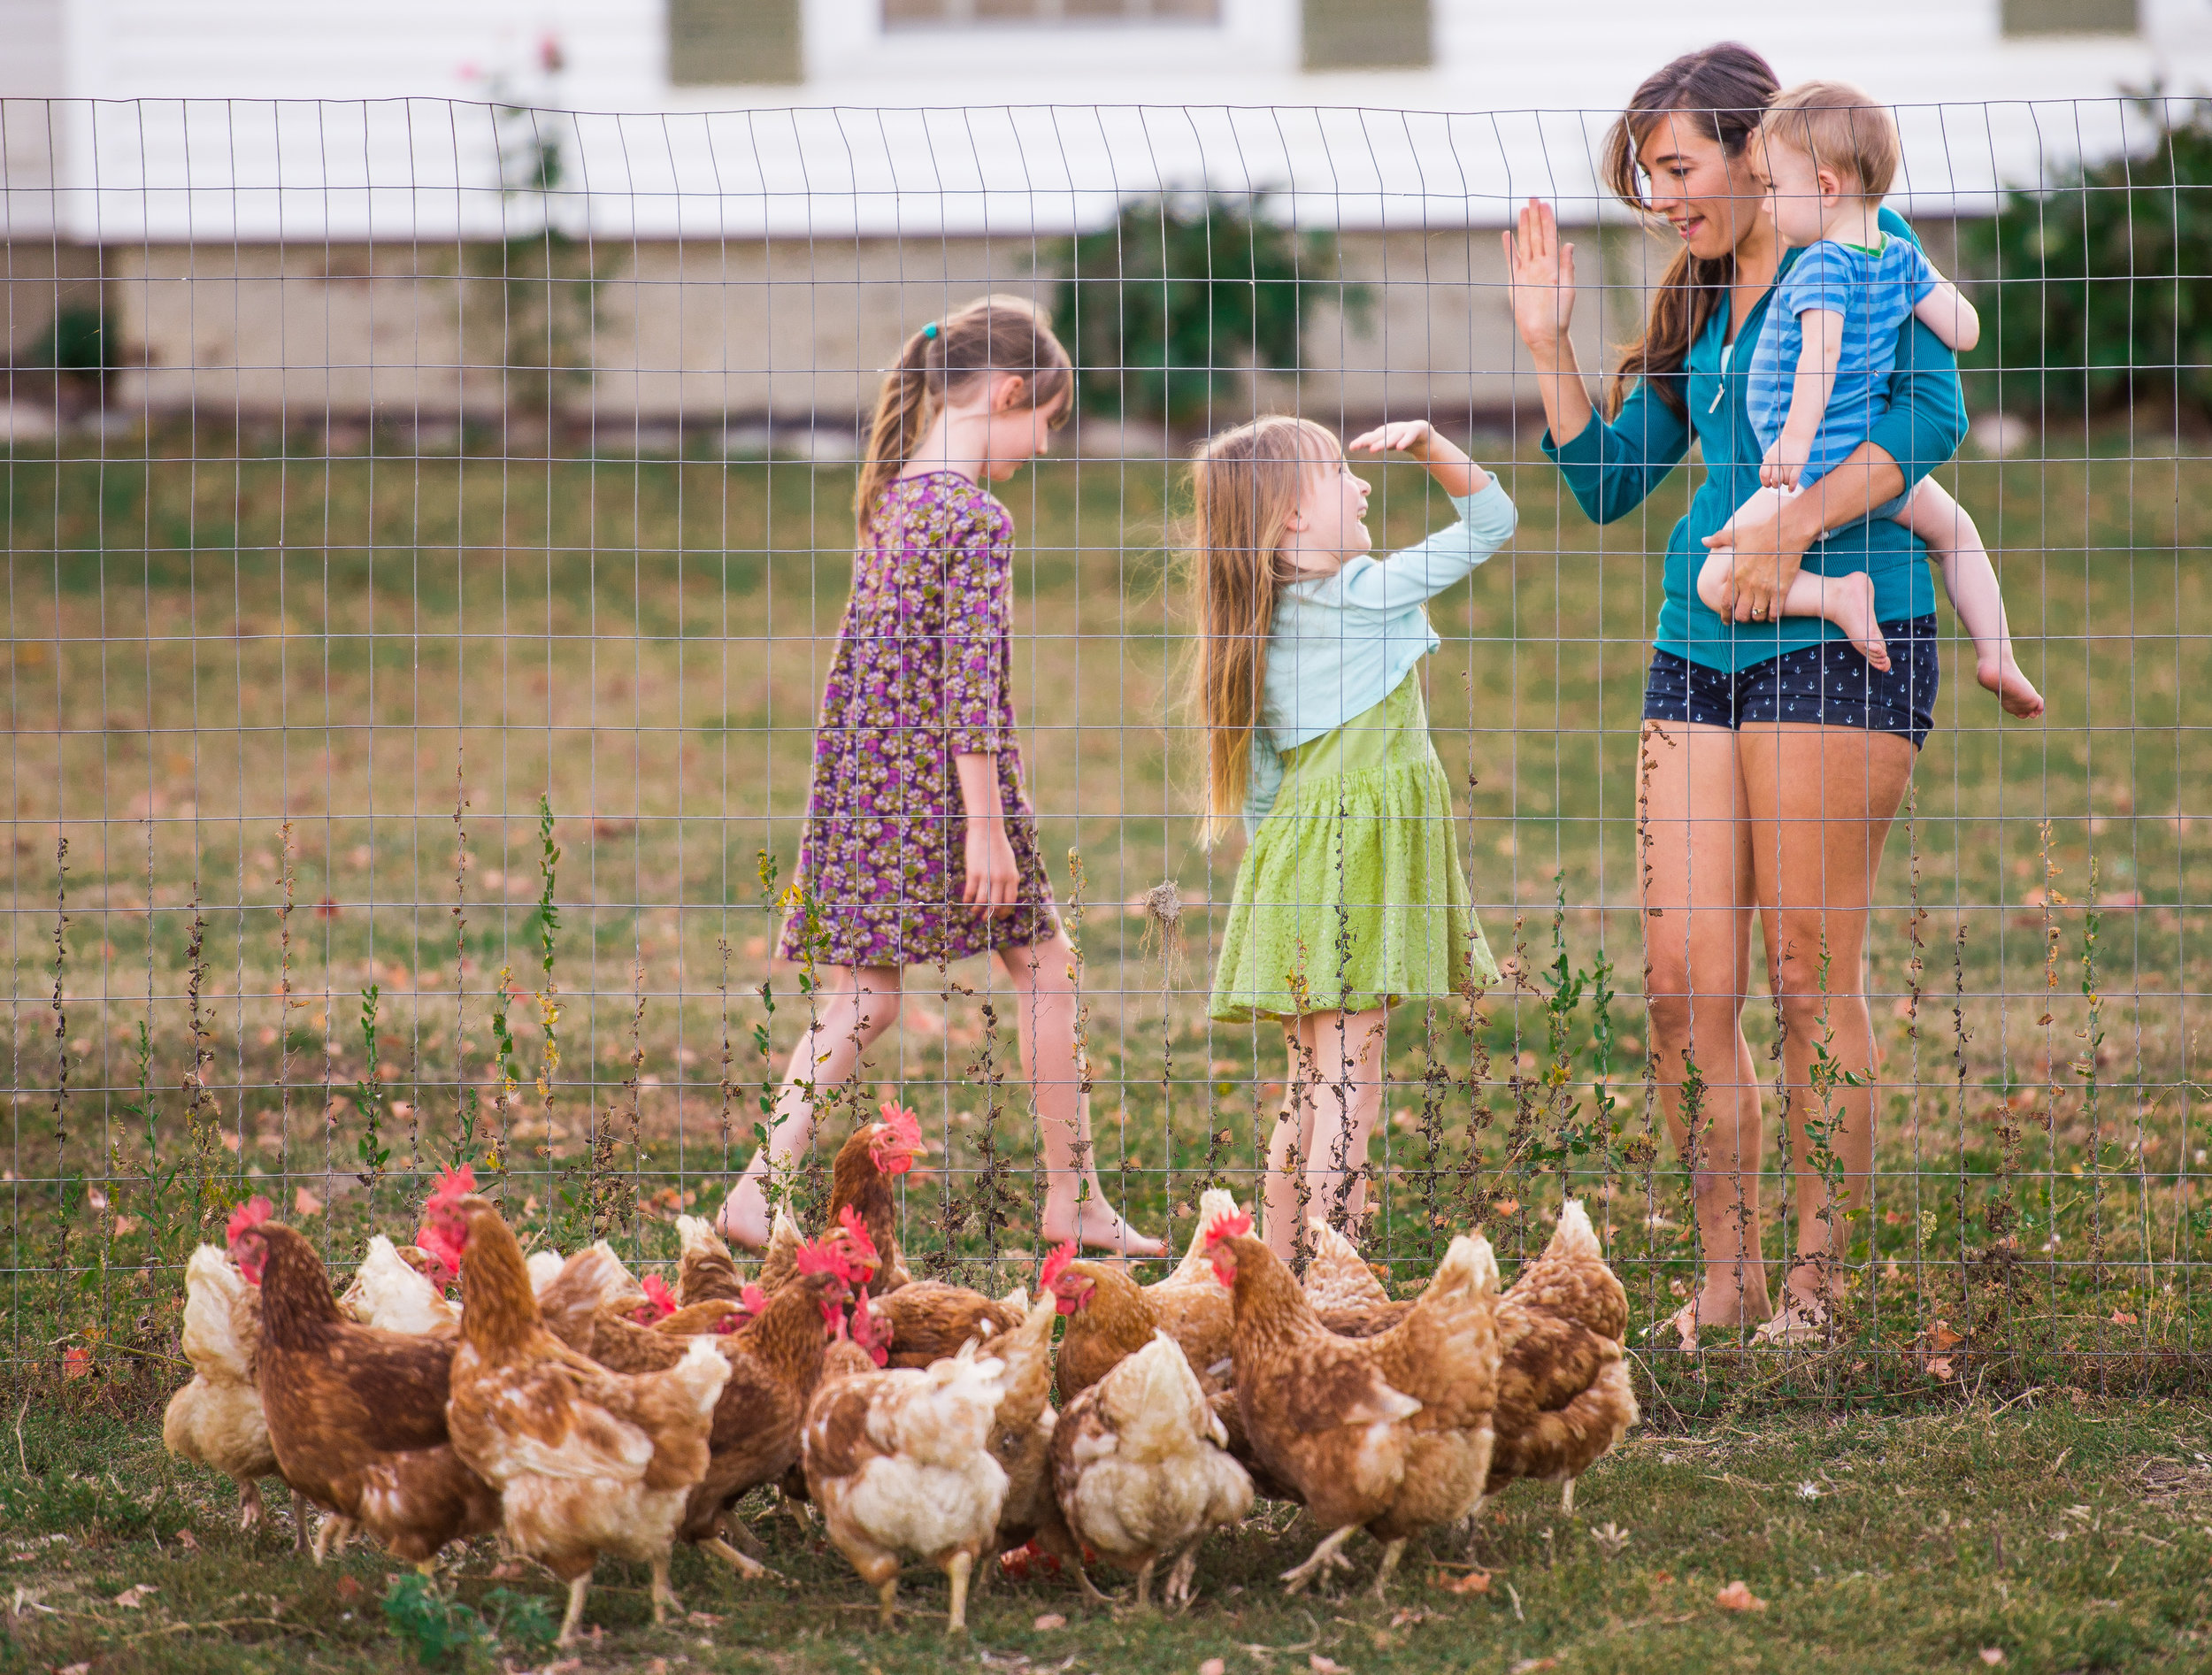  Jessamine, 5, high-fives her mother Michelle after giving an old red pepper to chickens at her grandmother Barb Monroe's home in Alma, Sept. 18. Barb, Fred's mother, watches the kids when Fred and Michelle are making drop-offs or working at the farm